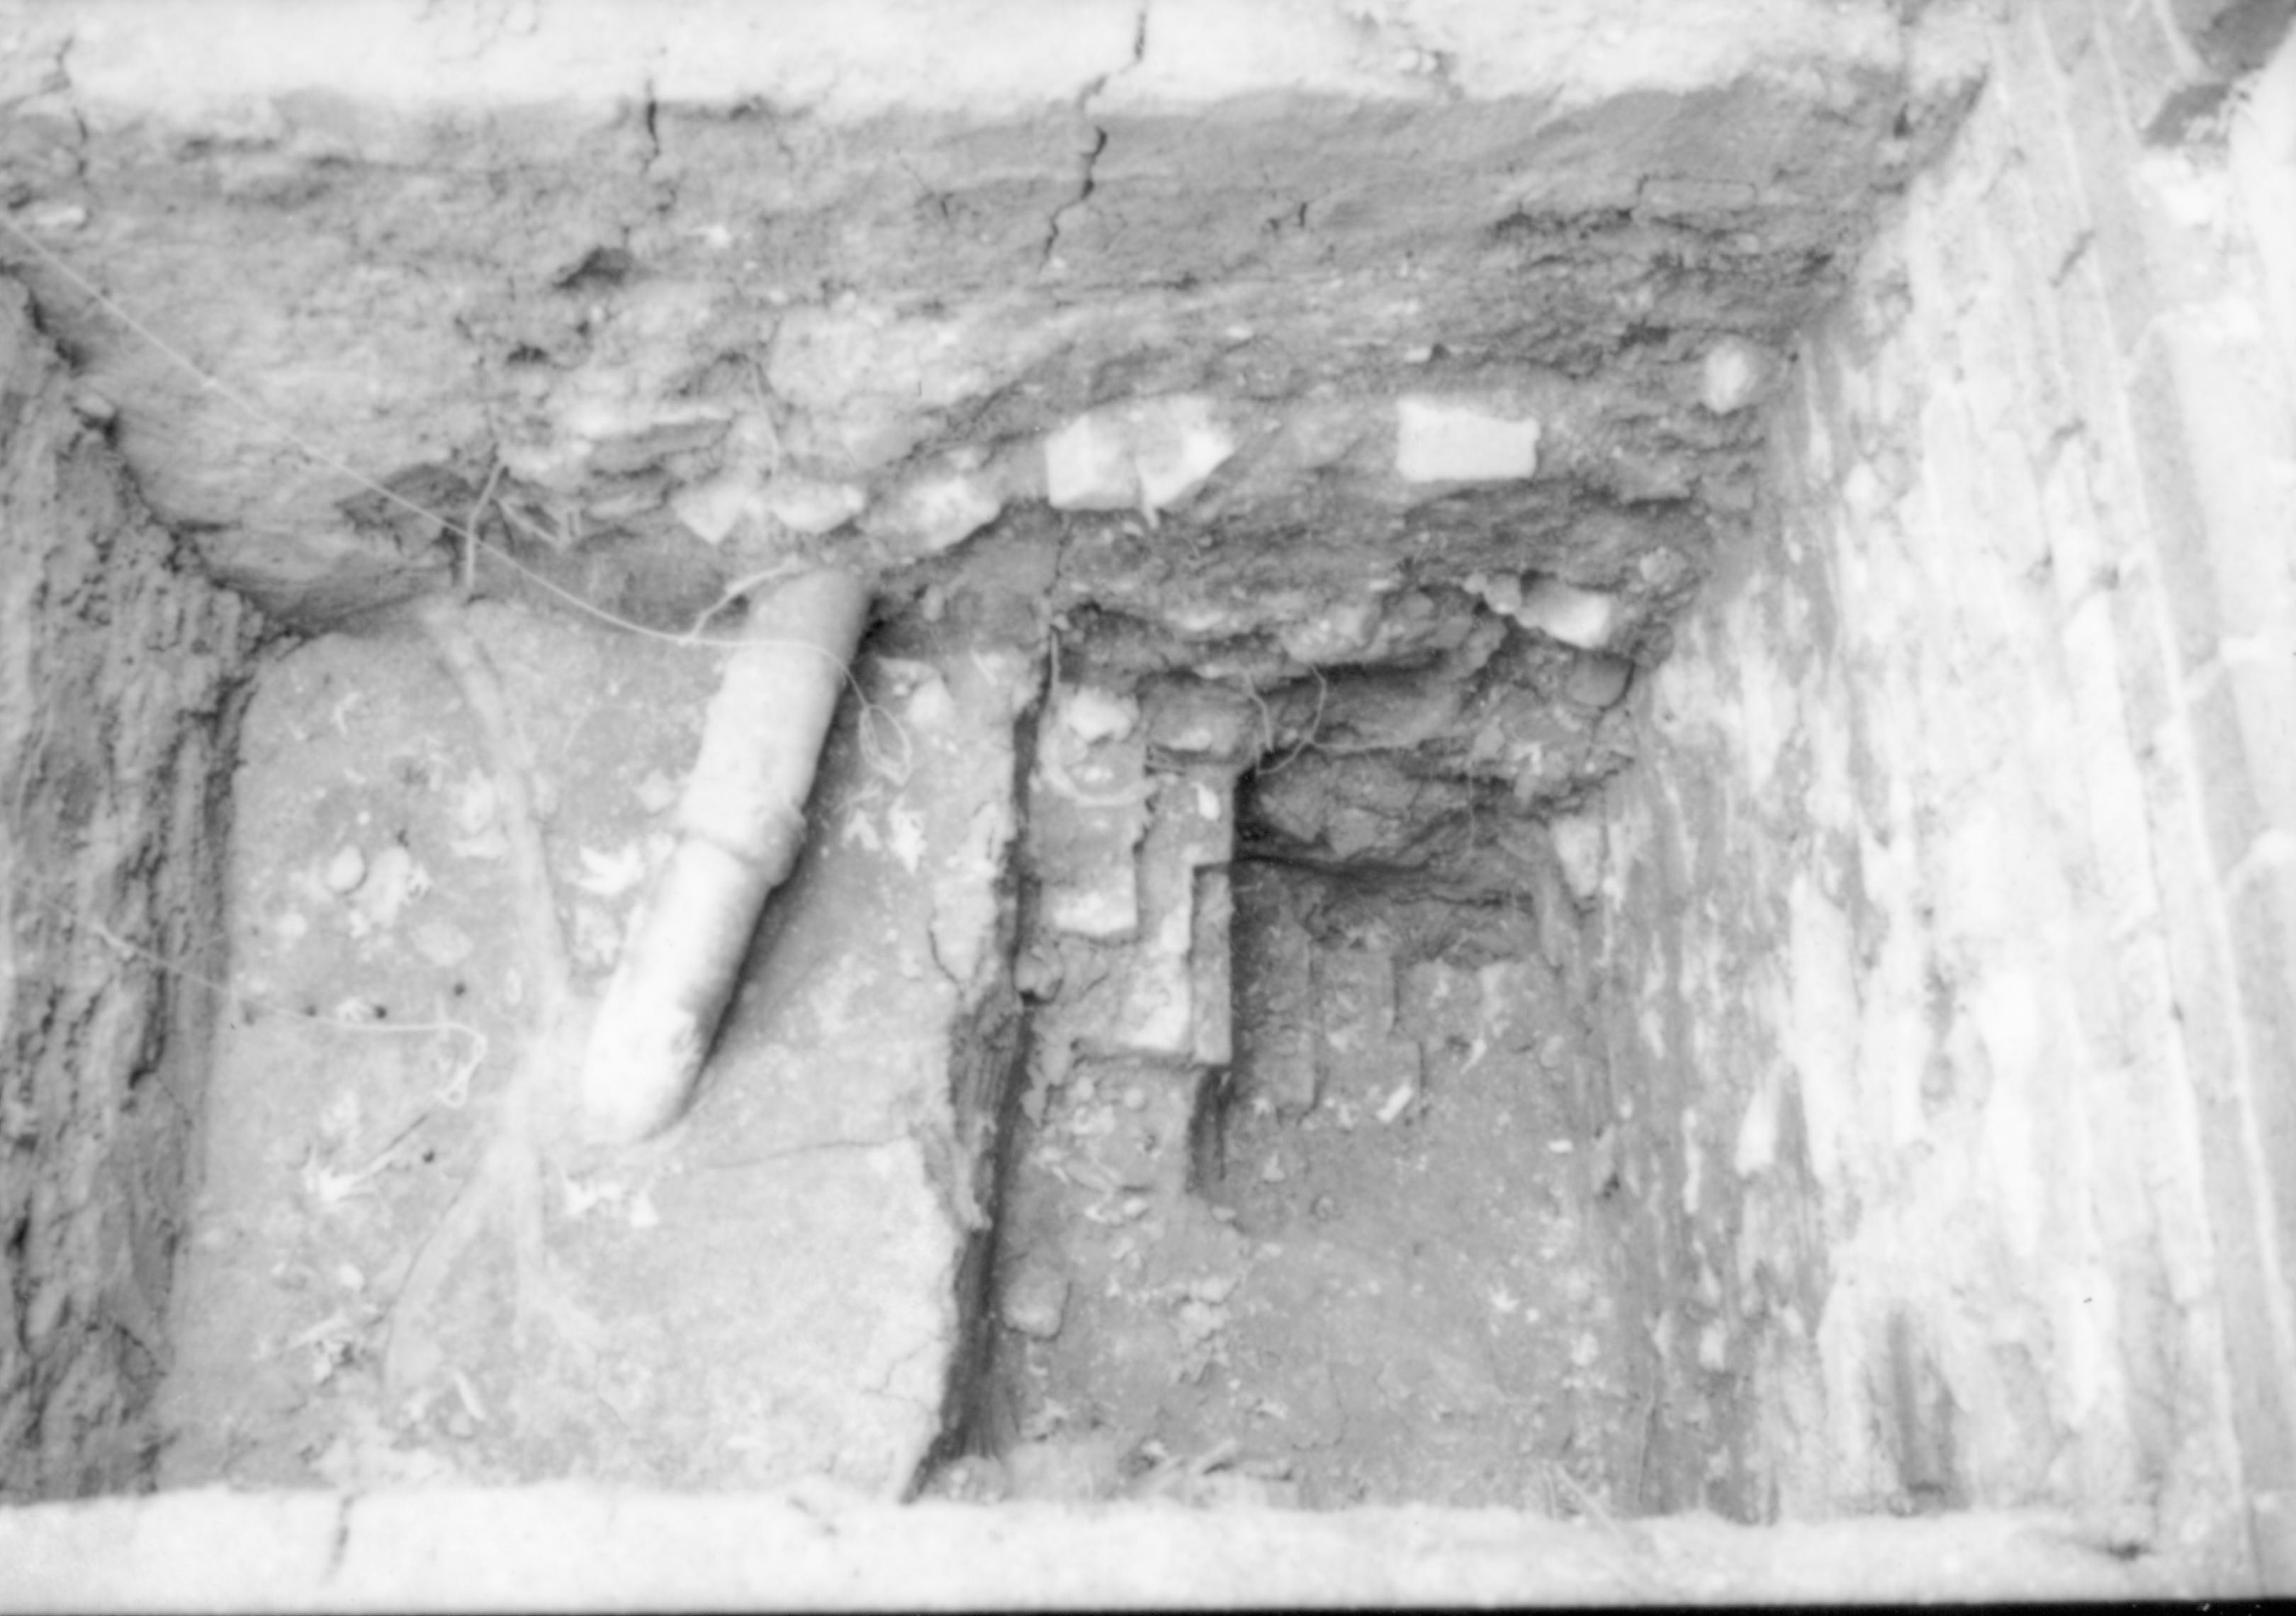 East- Archeological excavation under south porch Lincoln Home NHS, CRS Collections Move, Arnold Barn Foundations, Roll N16, exp 25 Dubois, cistern, excavation